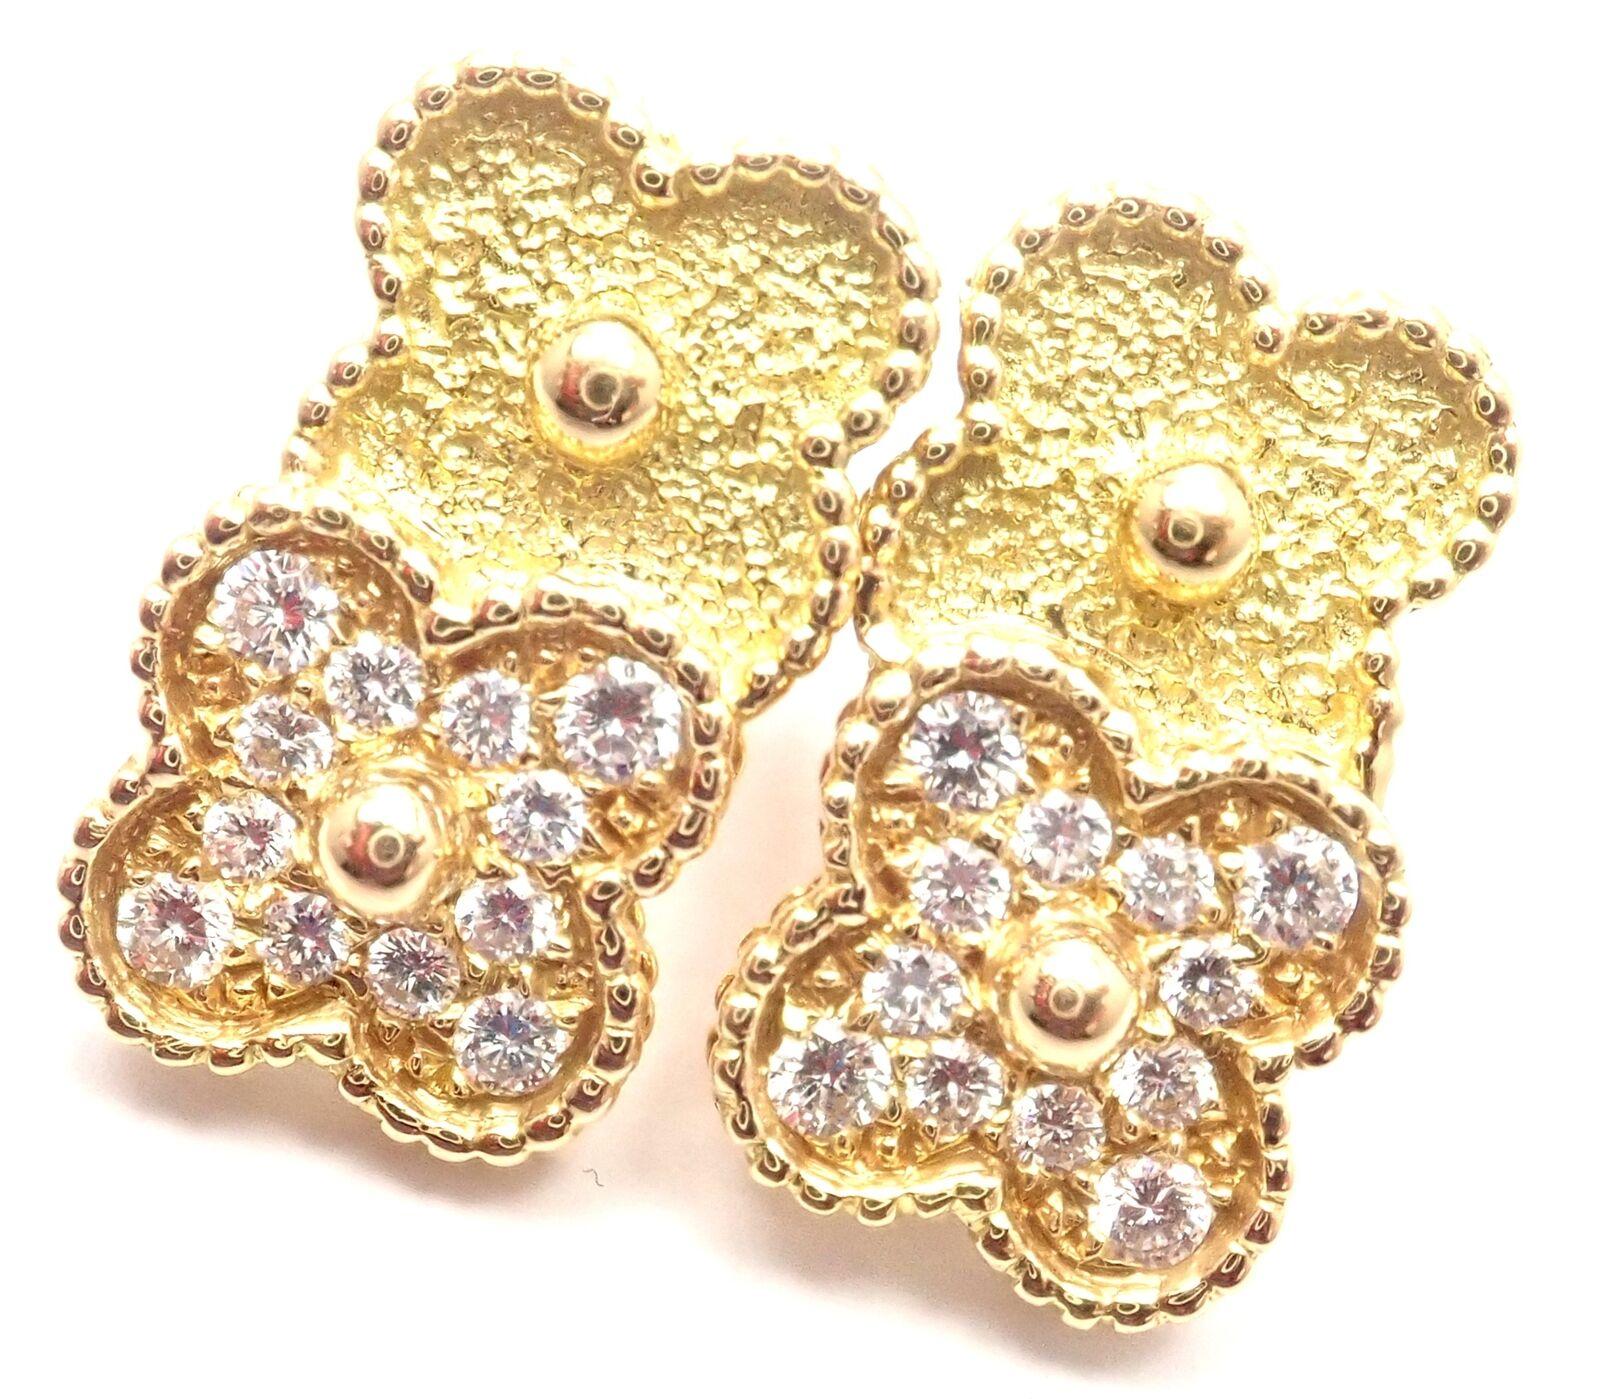 18k Yellow Gold And Diamond Vintage Alhambra Earrings
by Van Cleef & Arpels.
With 24 round brilliant cut diamond VVS1 clarity, E color total weight .92ct
These earrings are for non pierced ears.
These earrings come with Van Cleef & Arpels